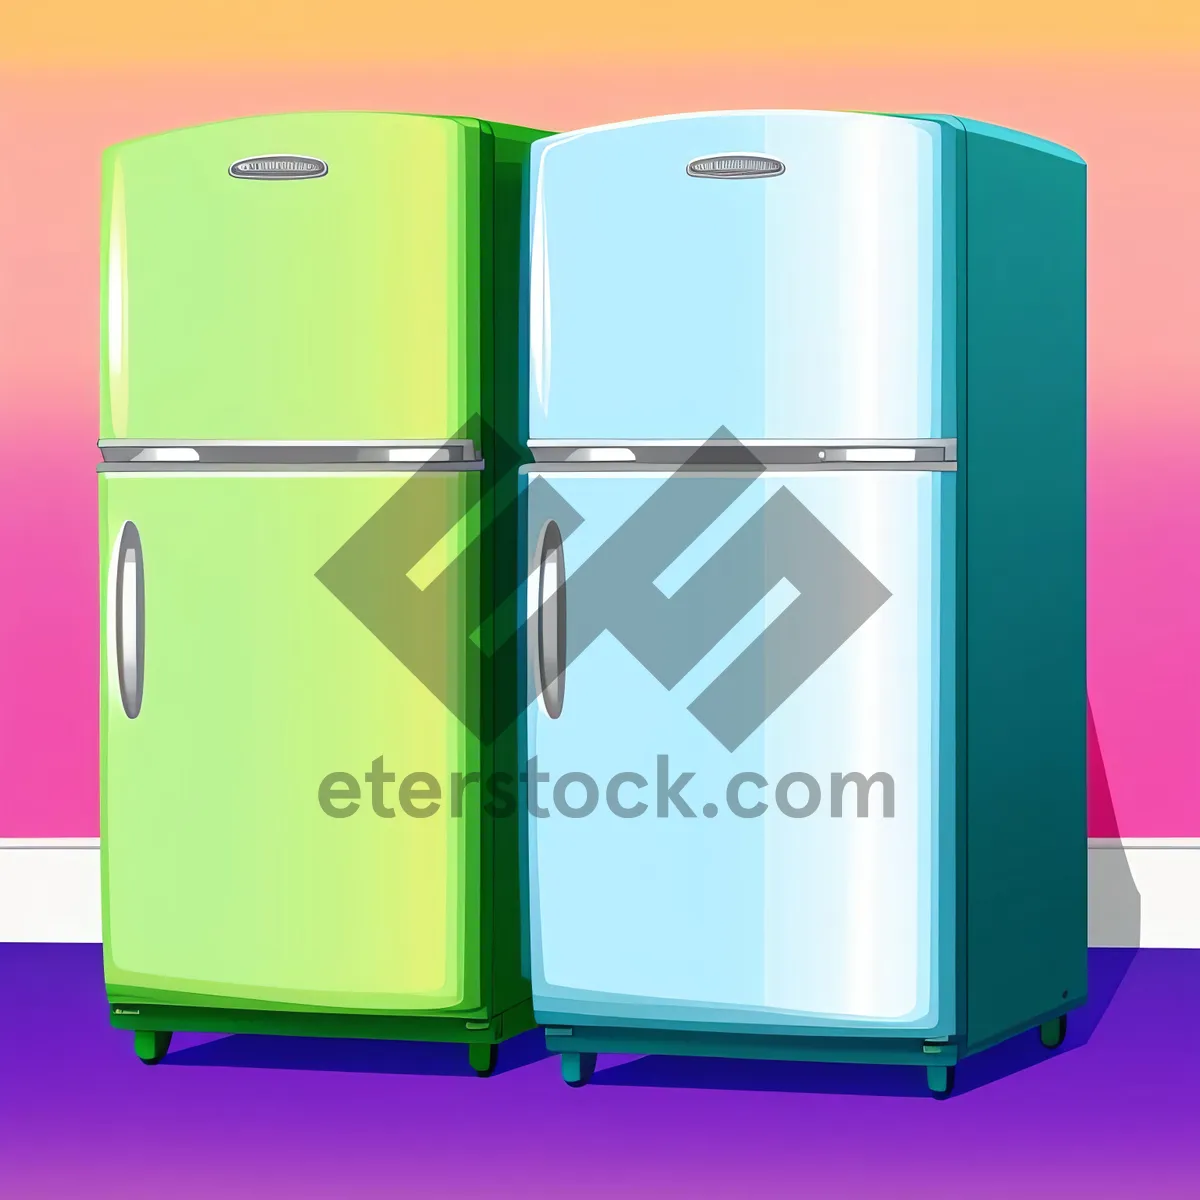 Picture of Efficient 3D Refrigeration System Icon for Packaging Design